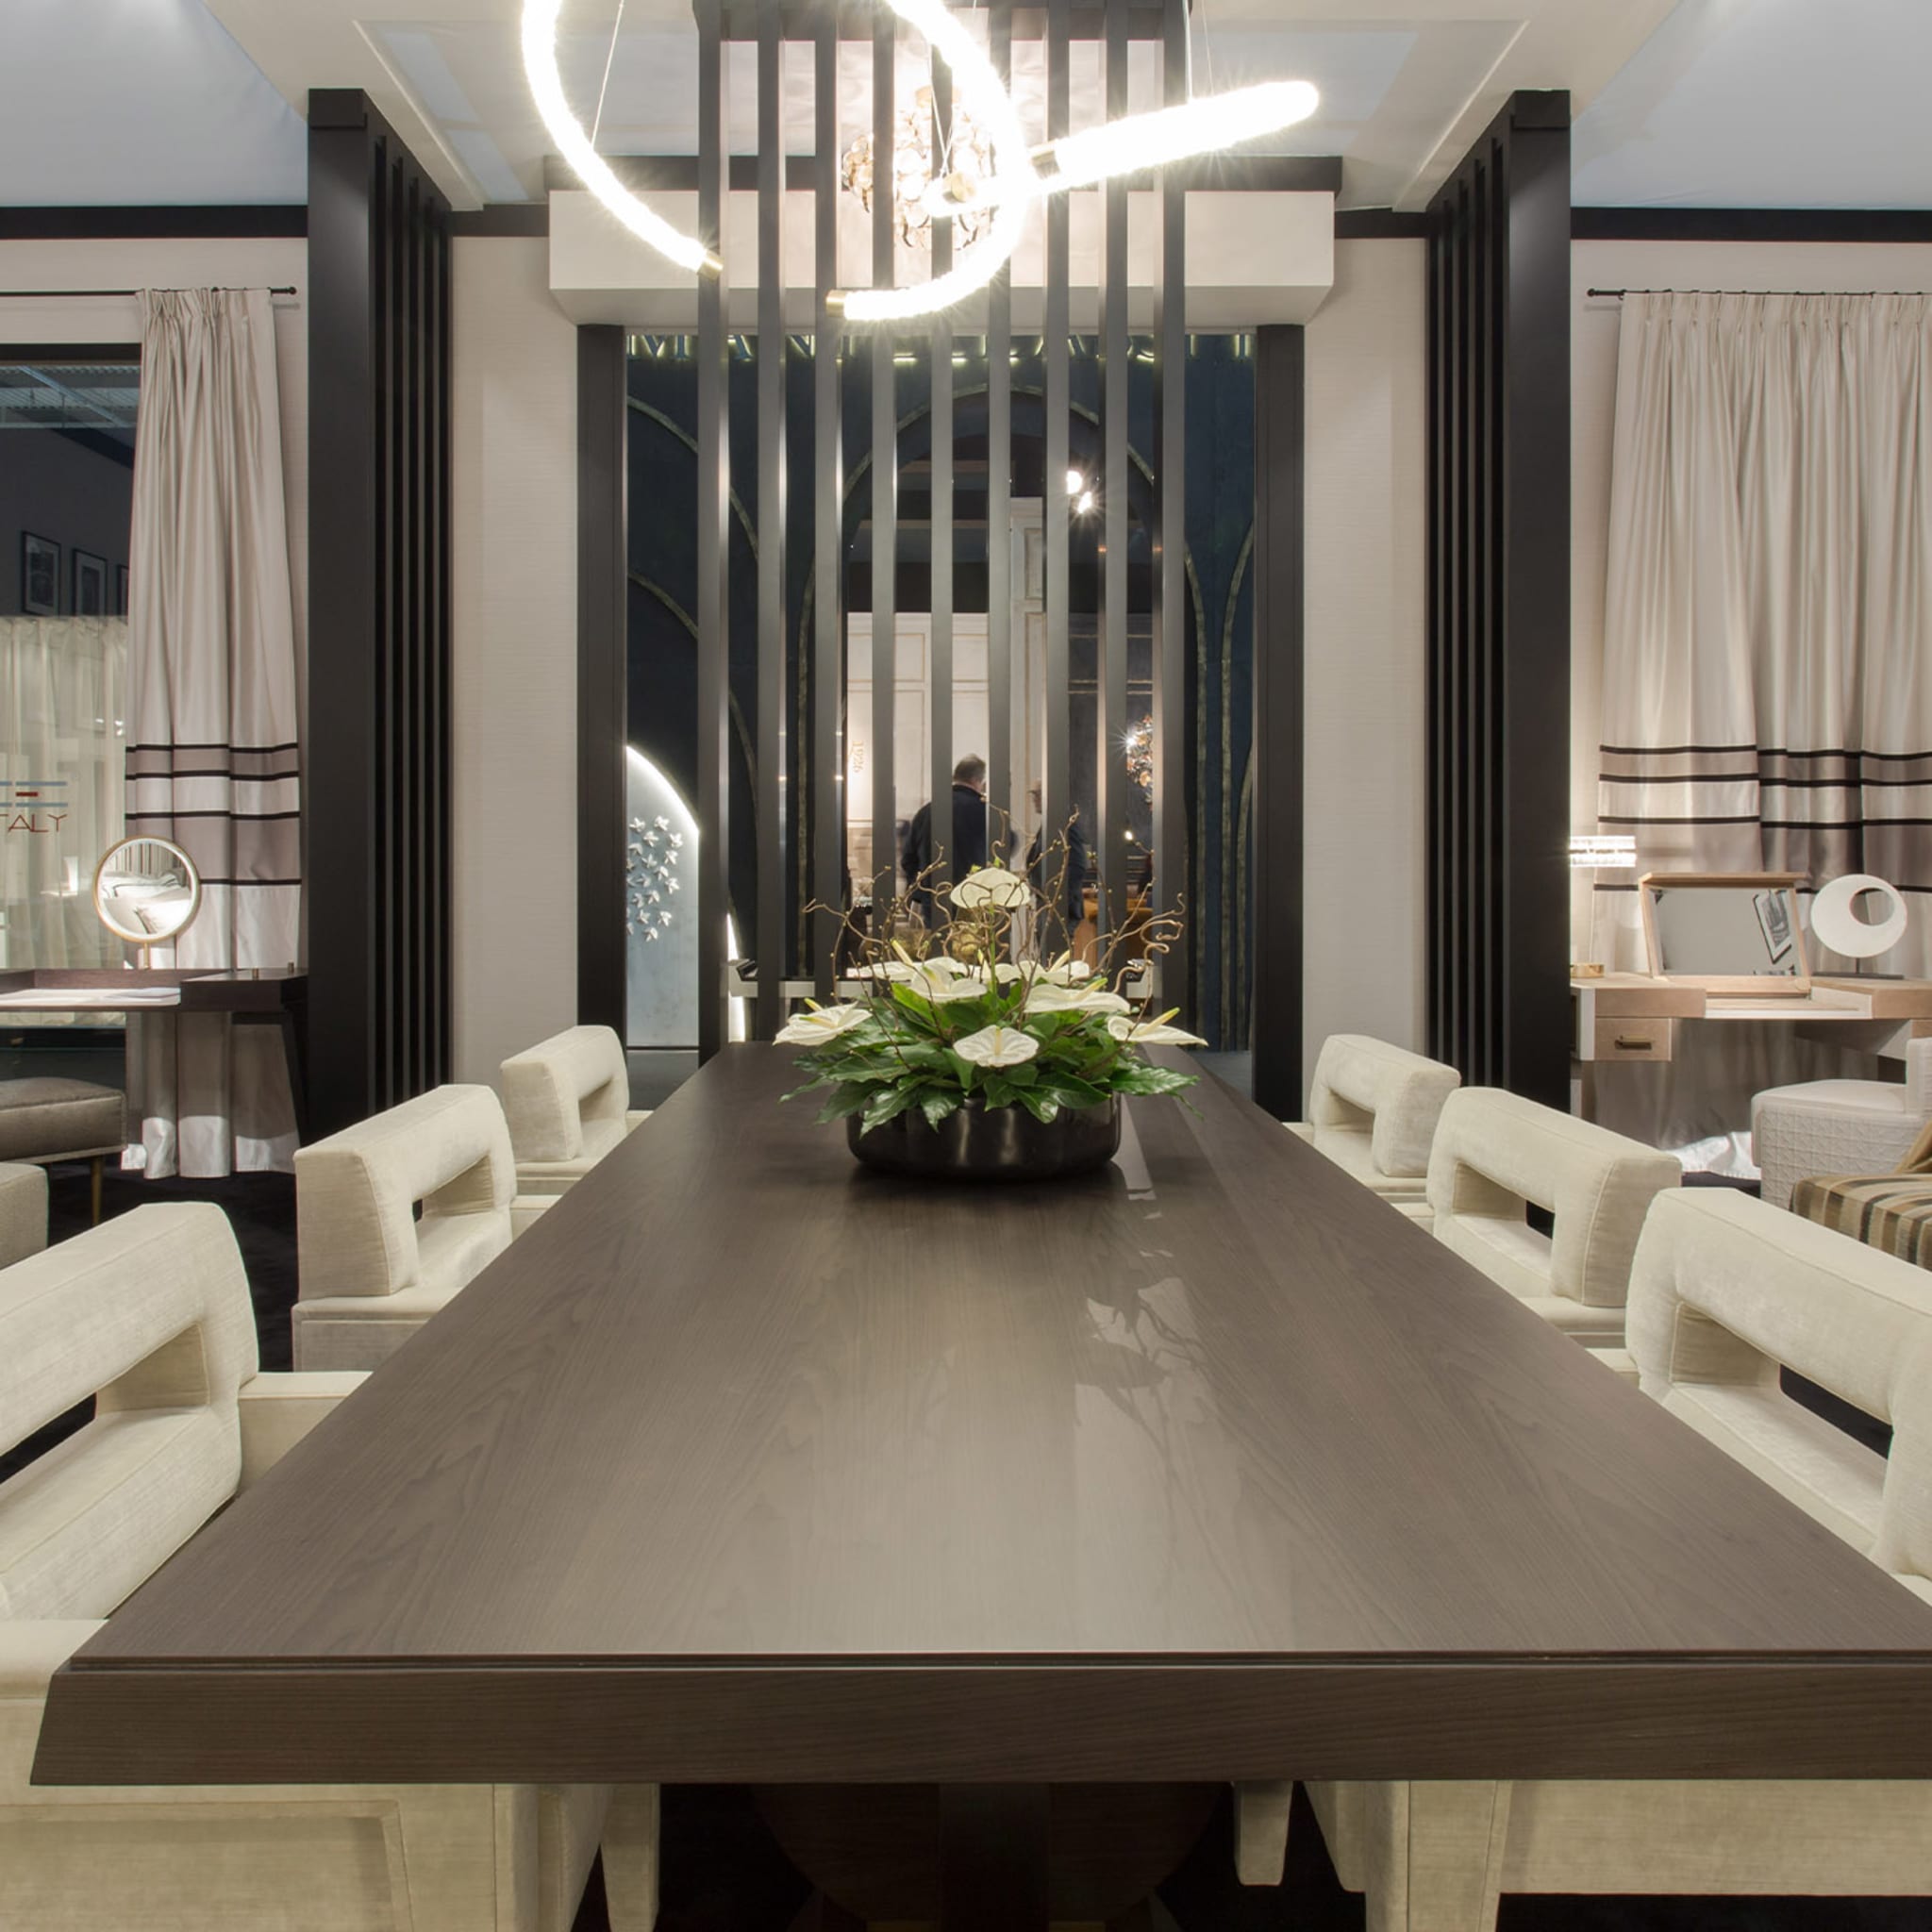 Gramercy Dining Table by Giannella Ventura - Alternative view 1